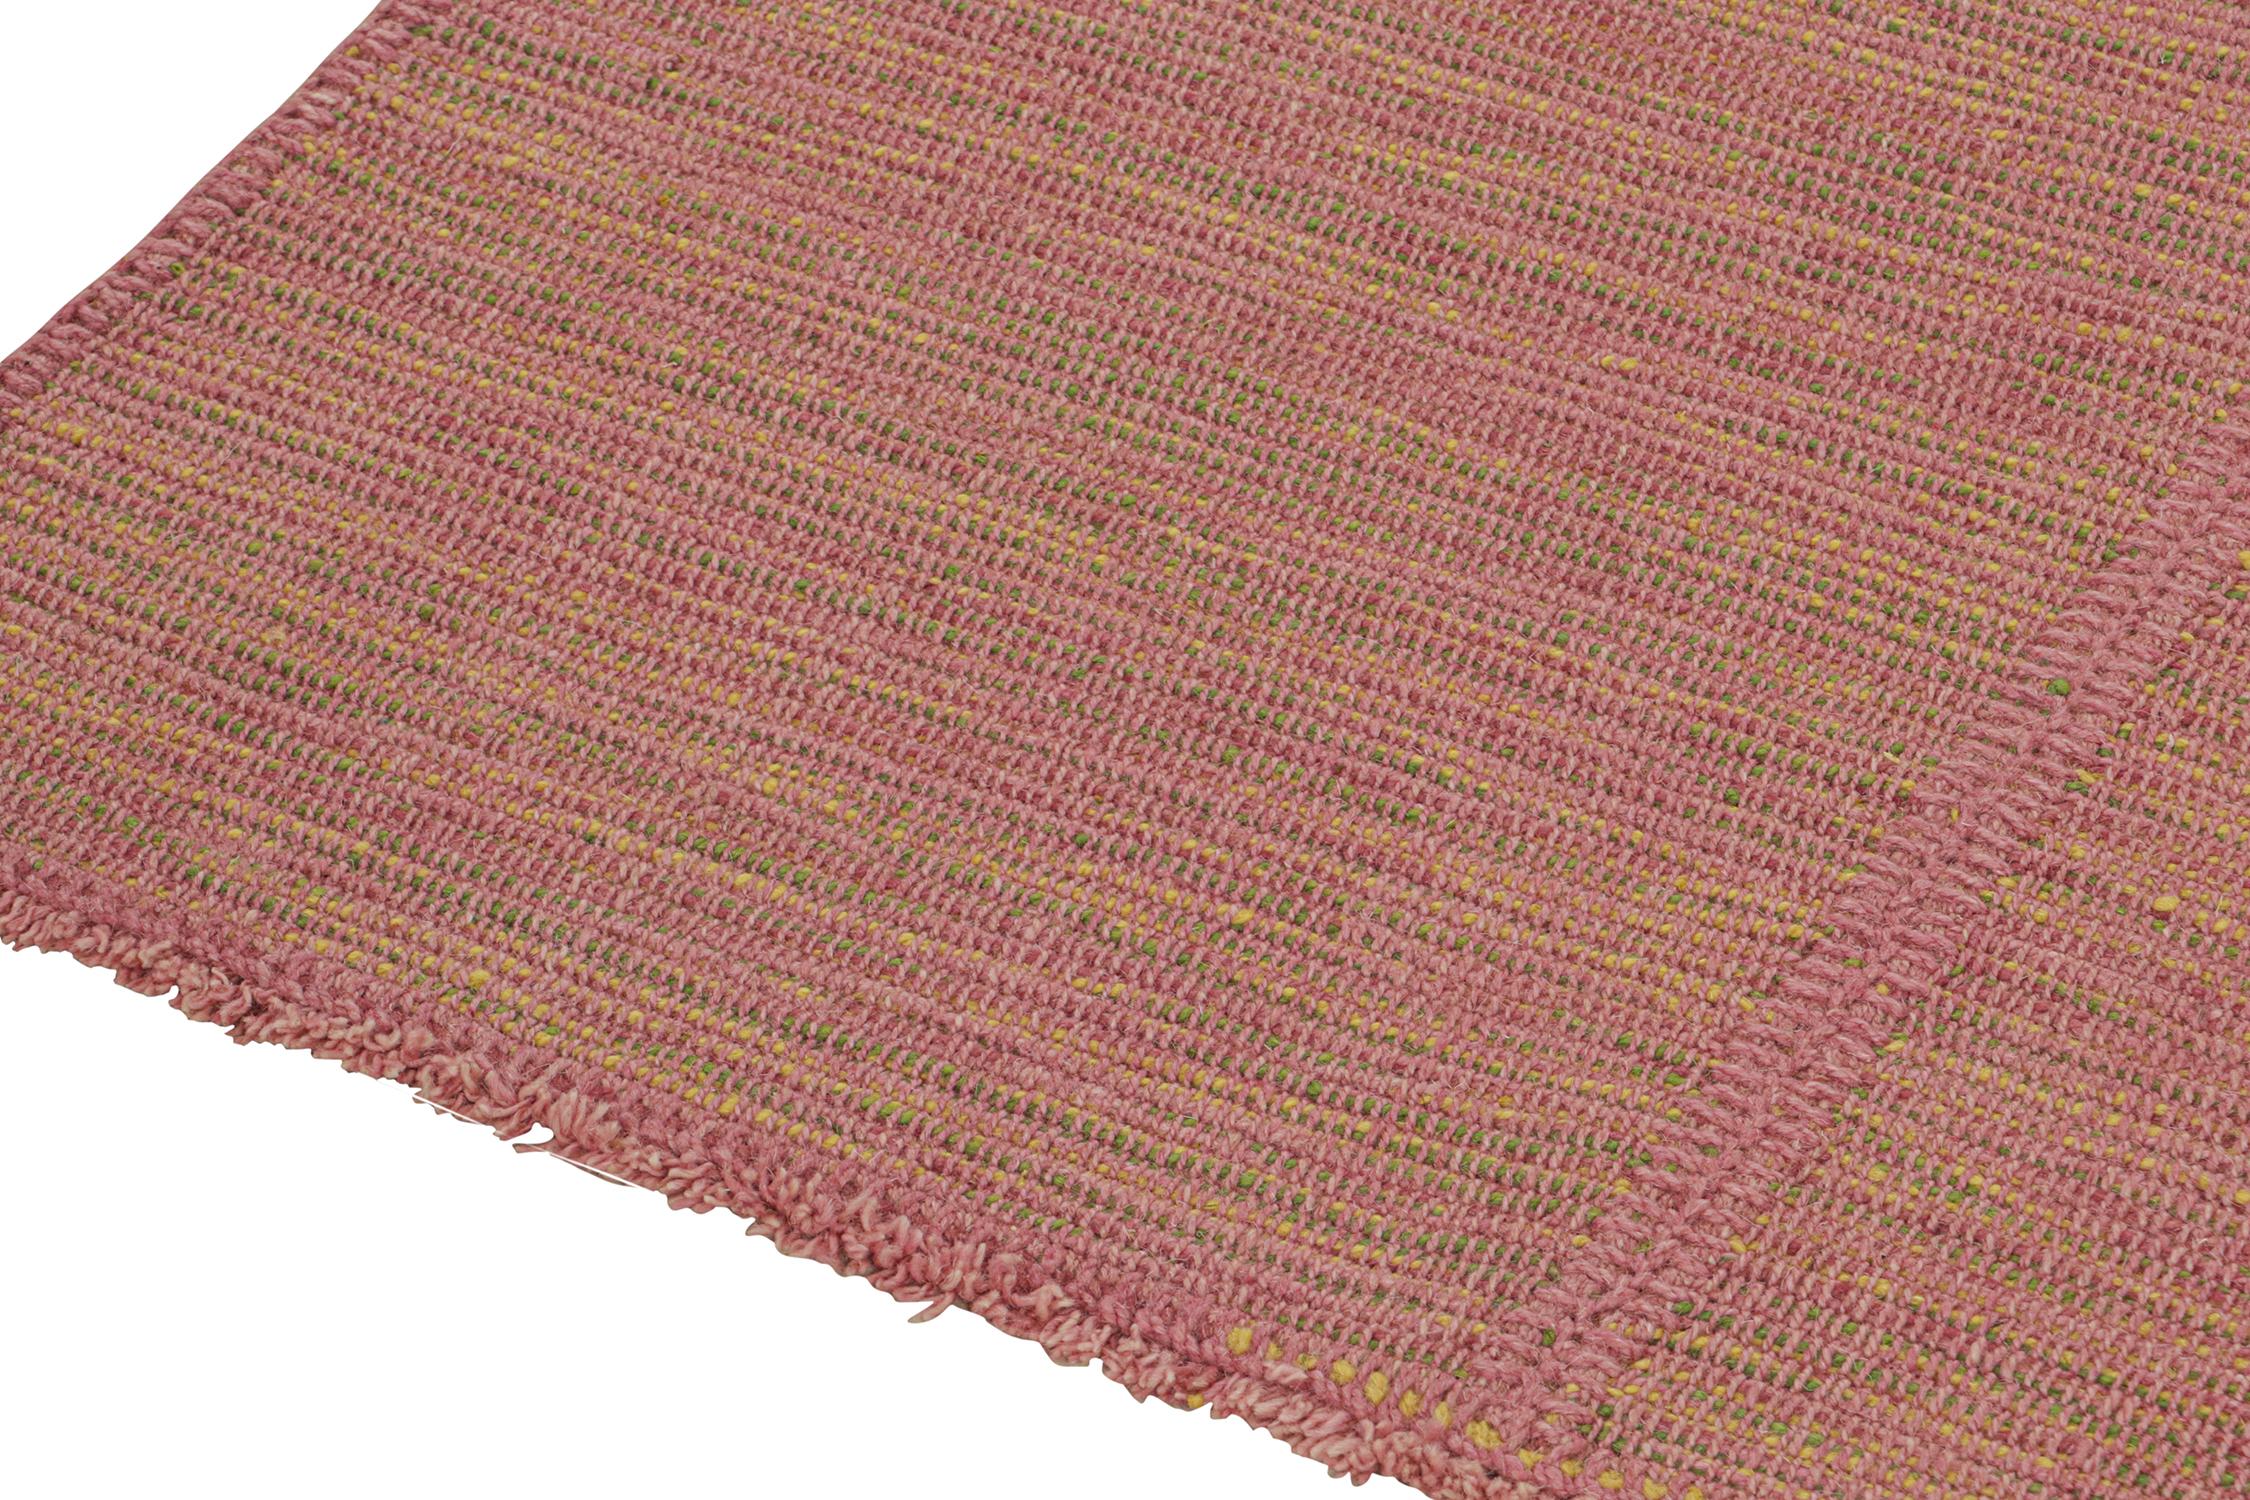 Noué à la main Rug & Kilim's Contemporary Kilim Rug in Pink with Yellow and Green Accents (tapis Kilim contemporain en rose avec des accents jaunes et verts) en vente